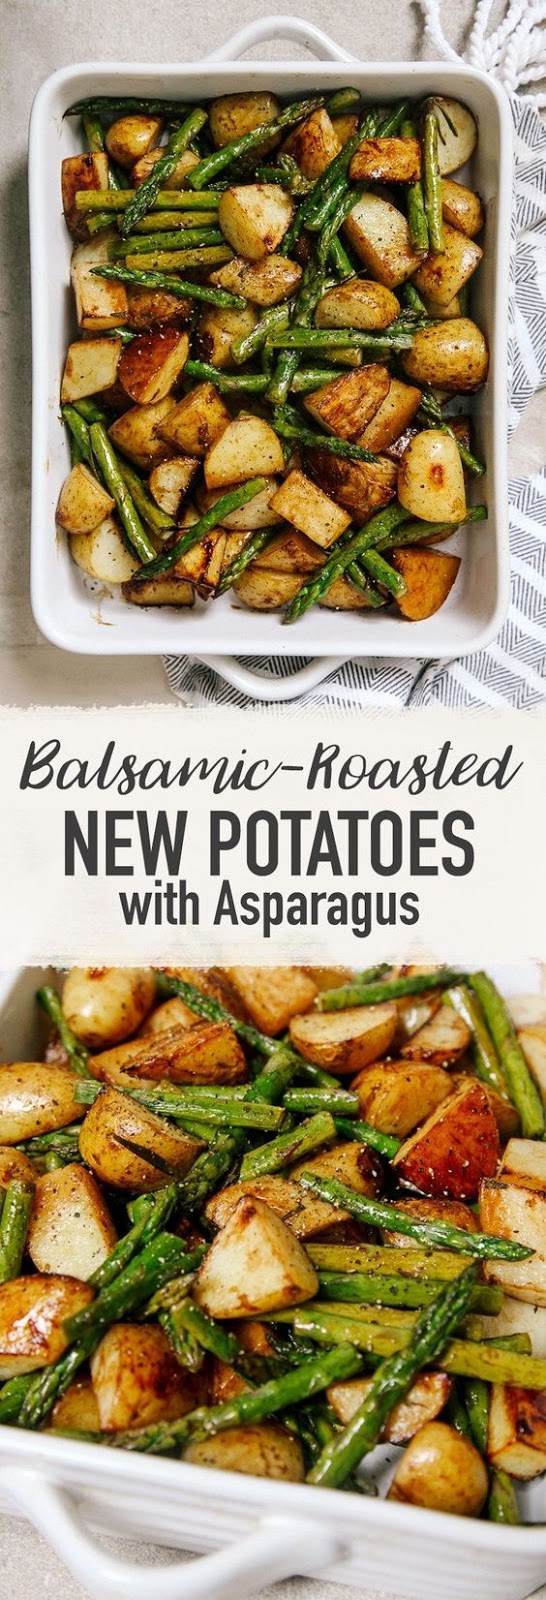 A simple, delicious side dish featuring seasonal asparagus and new potatoes with the subtle sweetness of balsamic vinegar.